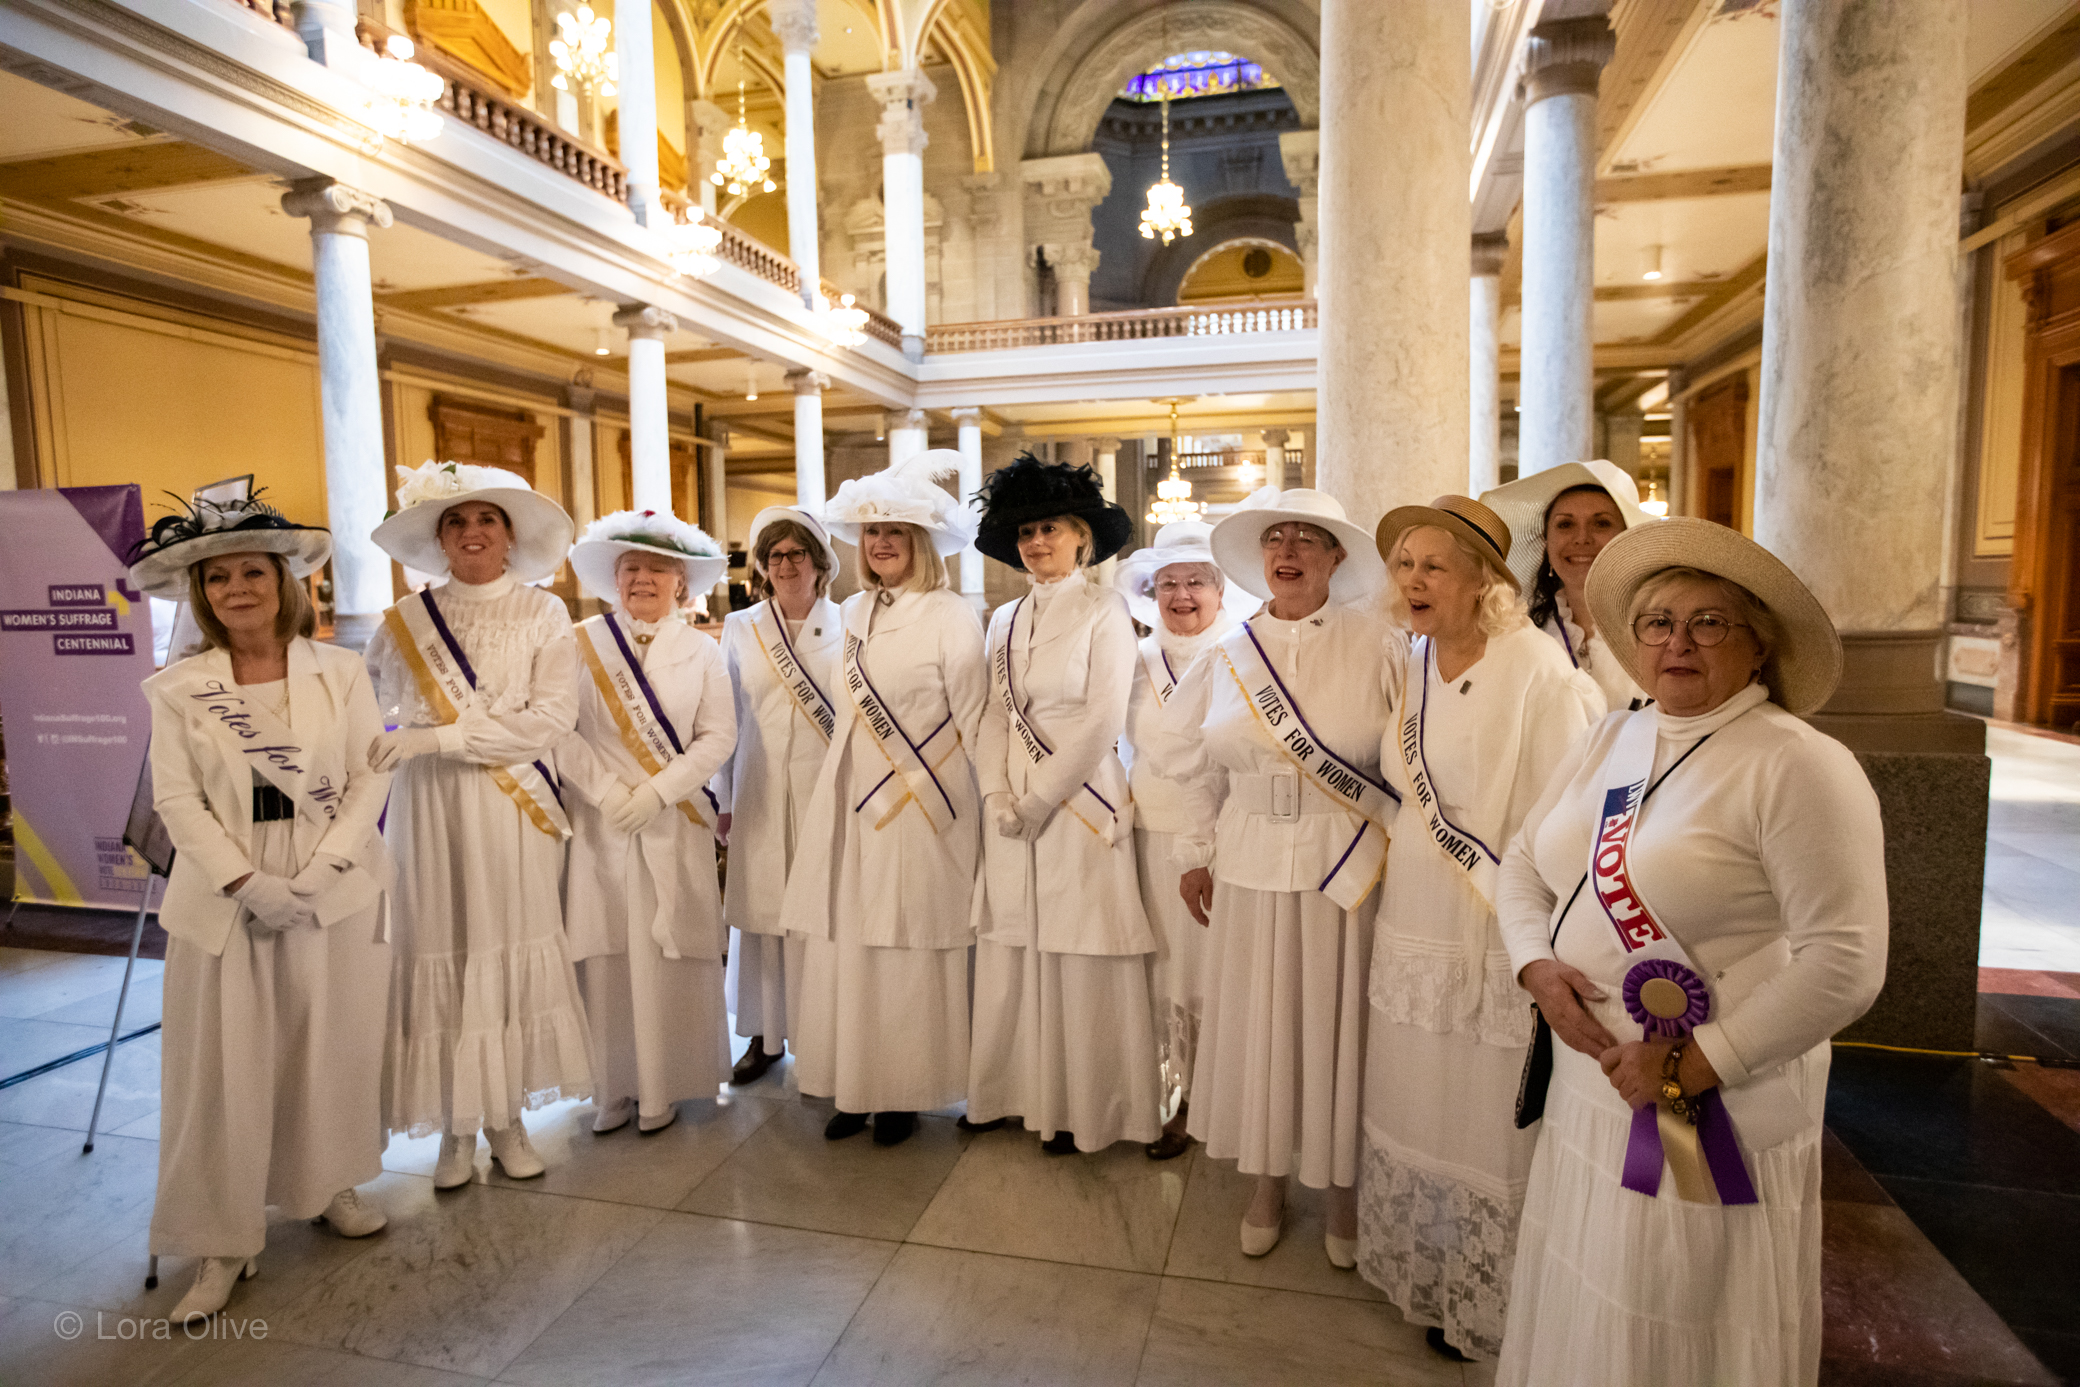 The Indiana Women's Suffrage Centennial Commission Celebration